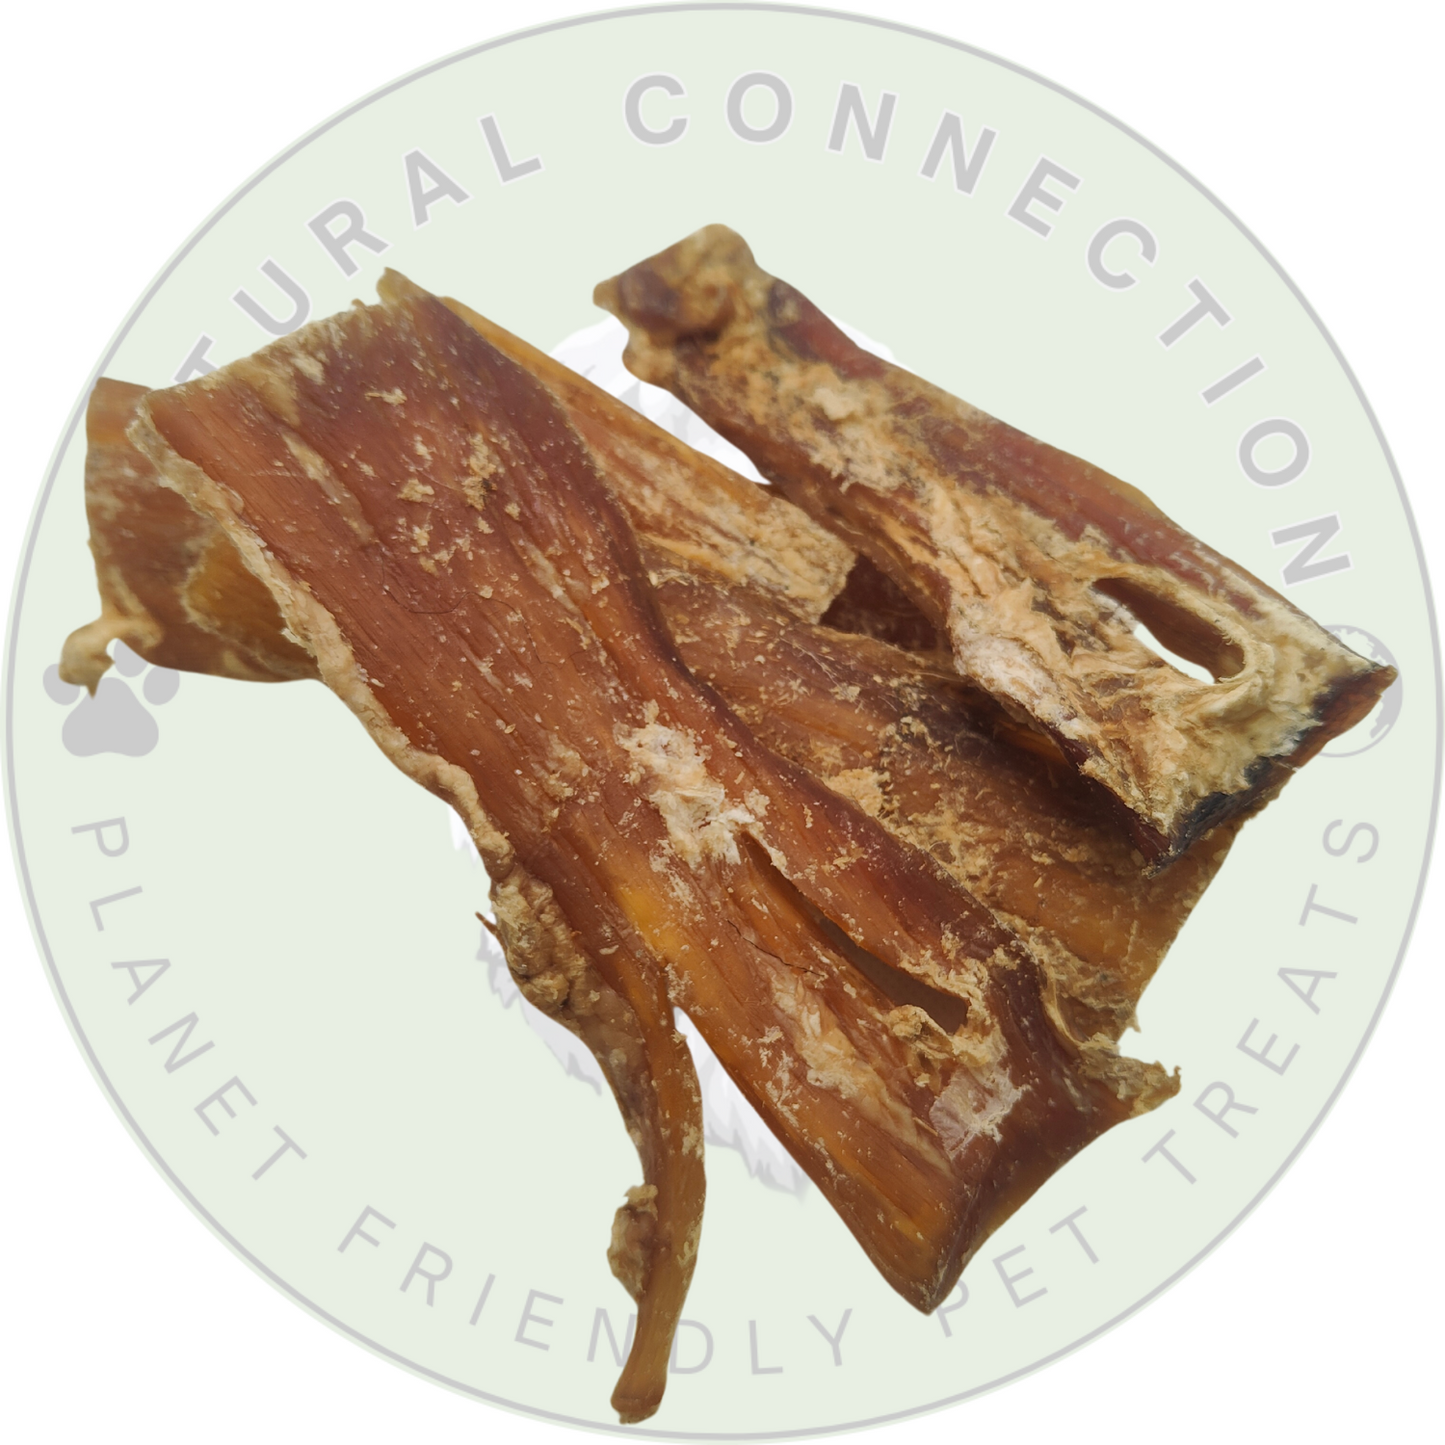 Beef Neck Tendon | Delicious, Tough Chewy Dog Treats by Natural Connection